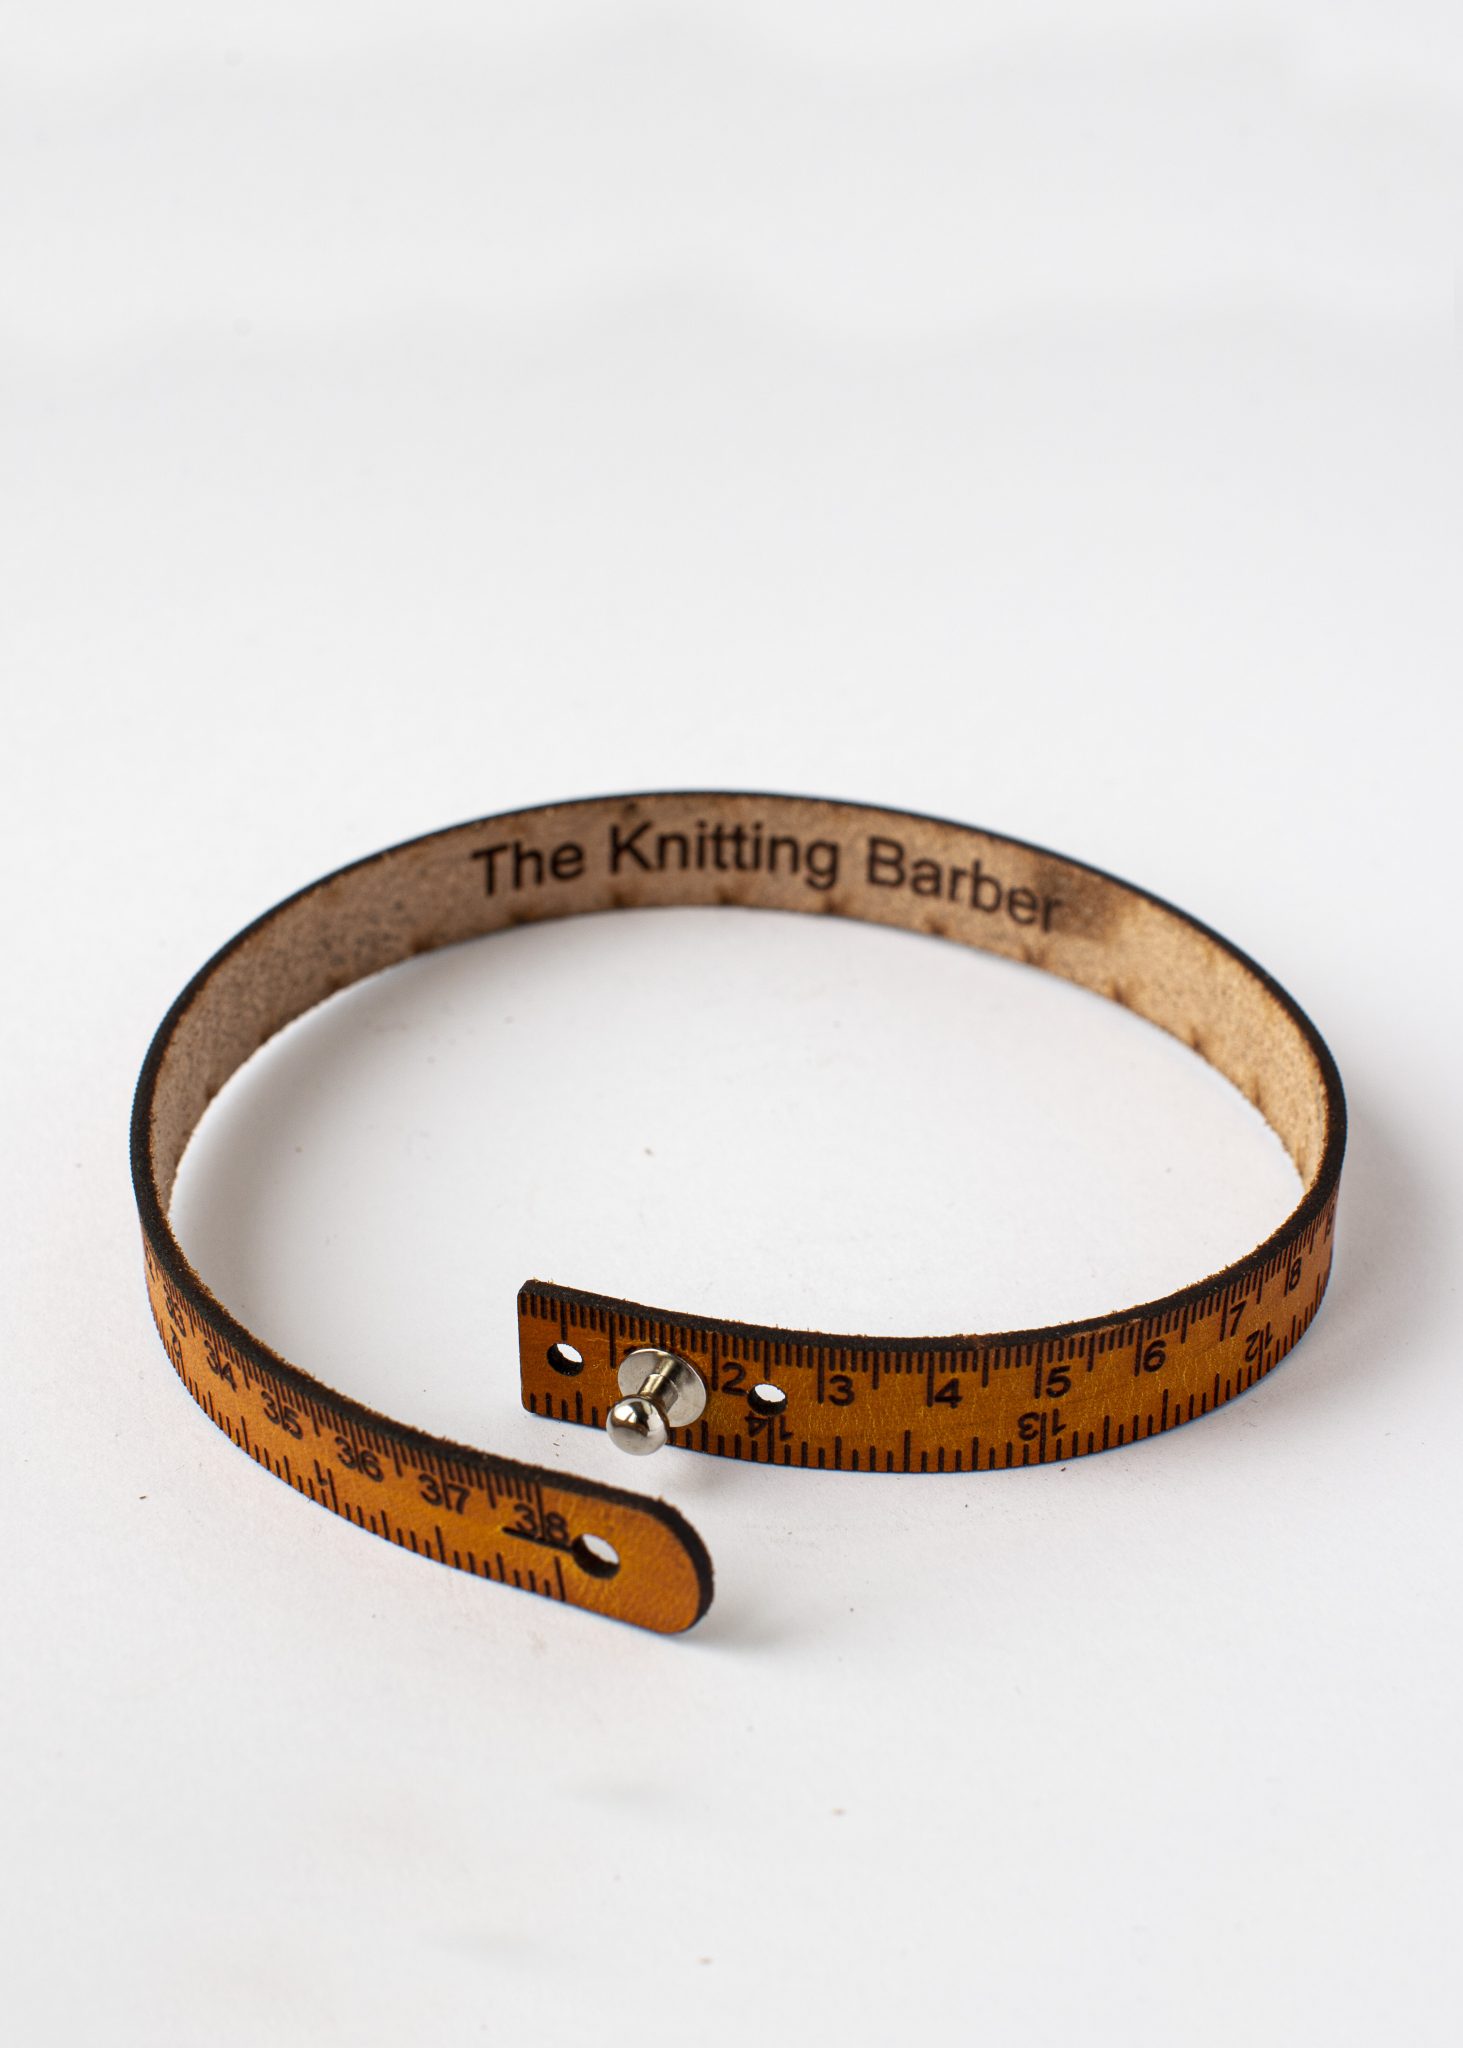 Tkb Cords The Knitting Barber  Shop Notions & Tools Online Today - Beehive  Wool Shop